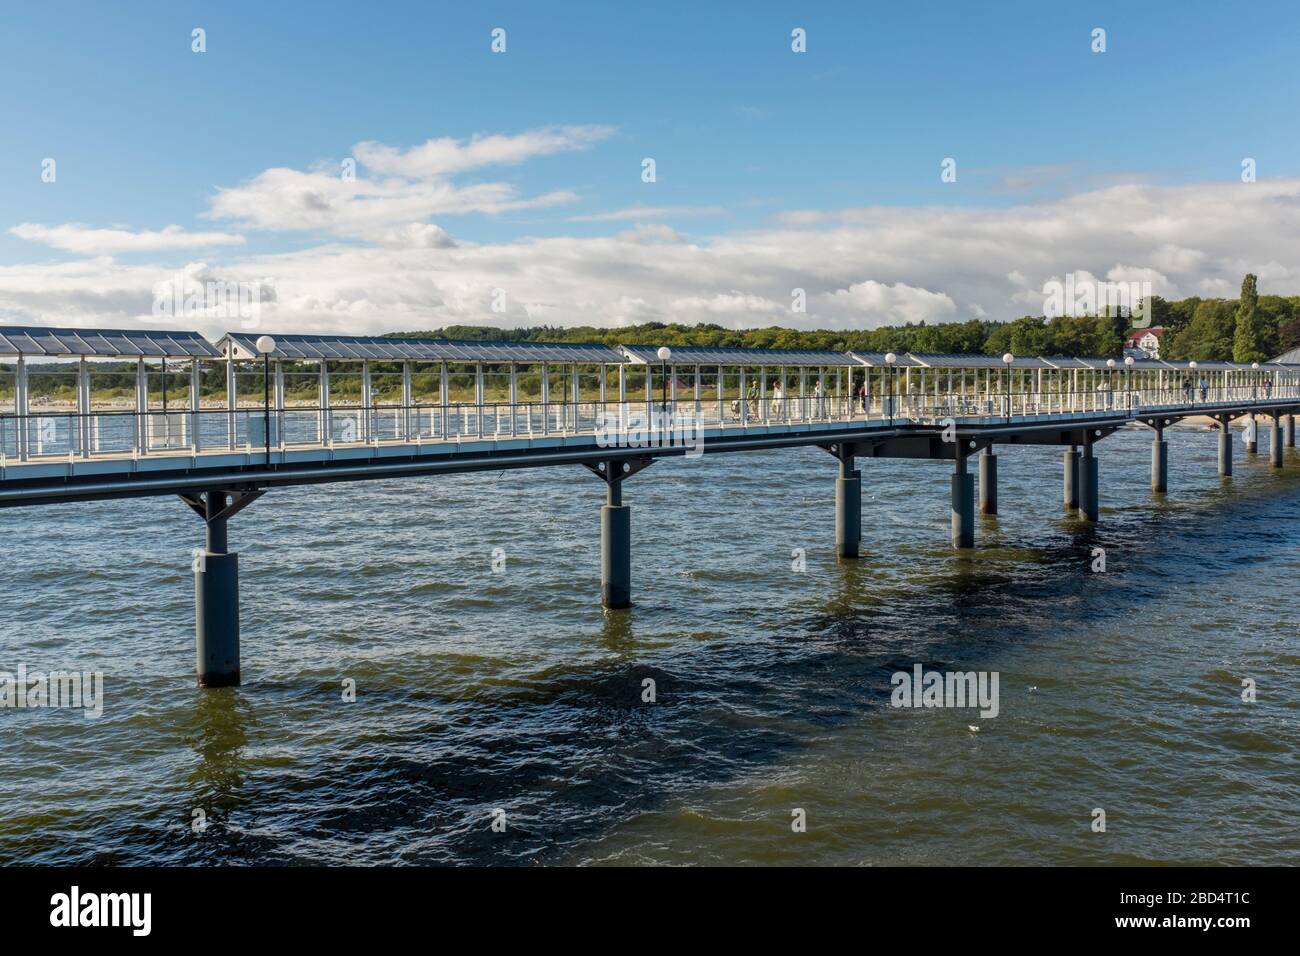 The pier, known as Seebrücke in German, at Heringsdorf on the island of Usedom, Baltic Coast, Germany Stock Photo